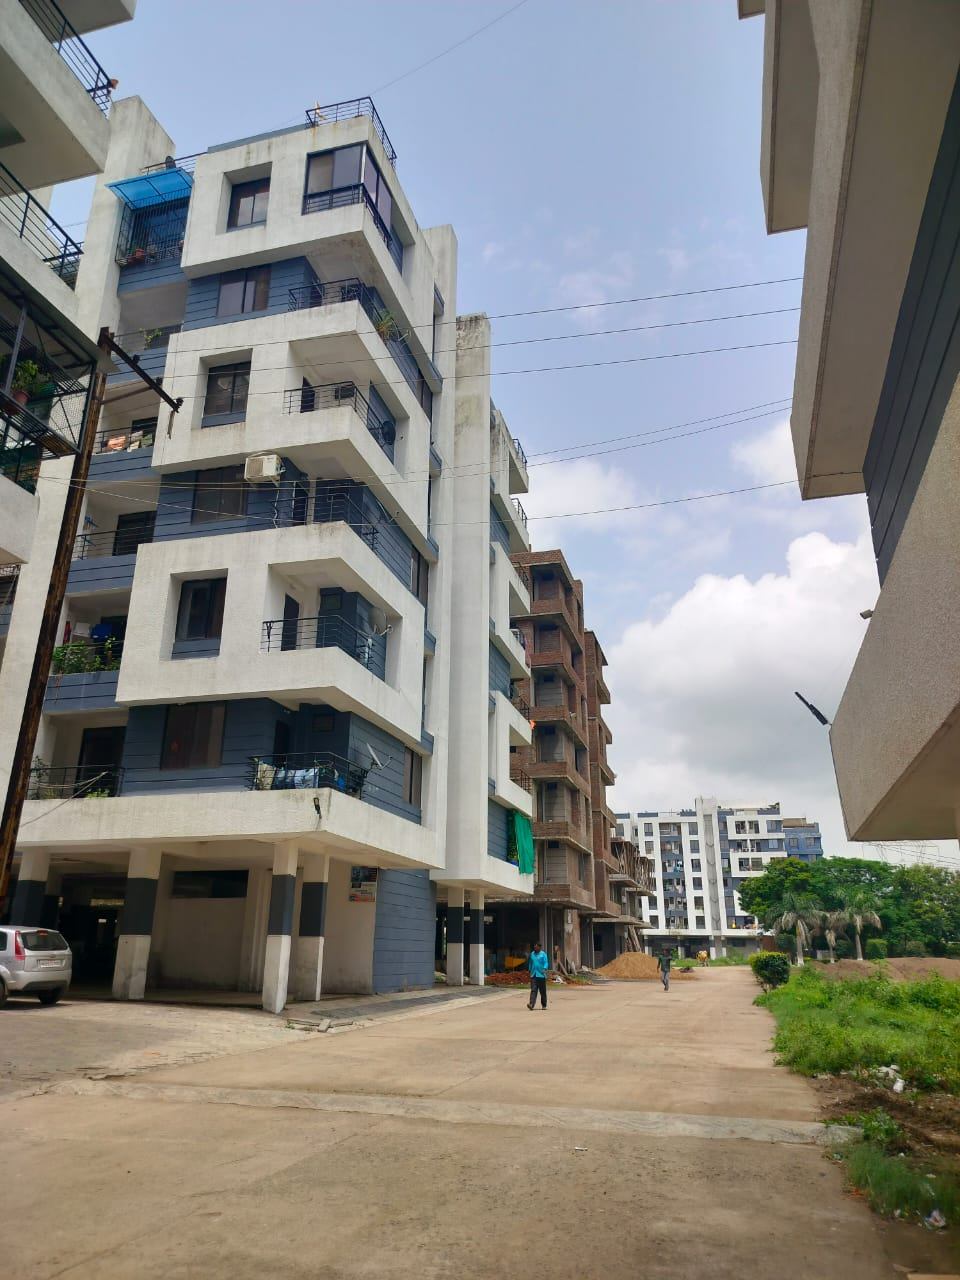 2 Bed/ 2 Bath Sell Apartment/ Flat; 641 sq. ft. carpet area; Ready To Move for sale @Nearby Medicaps university in rau 